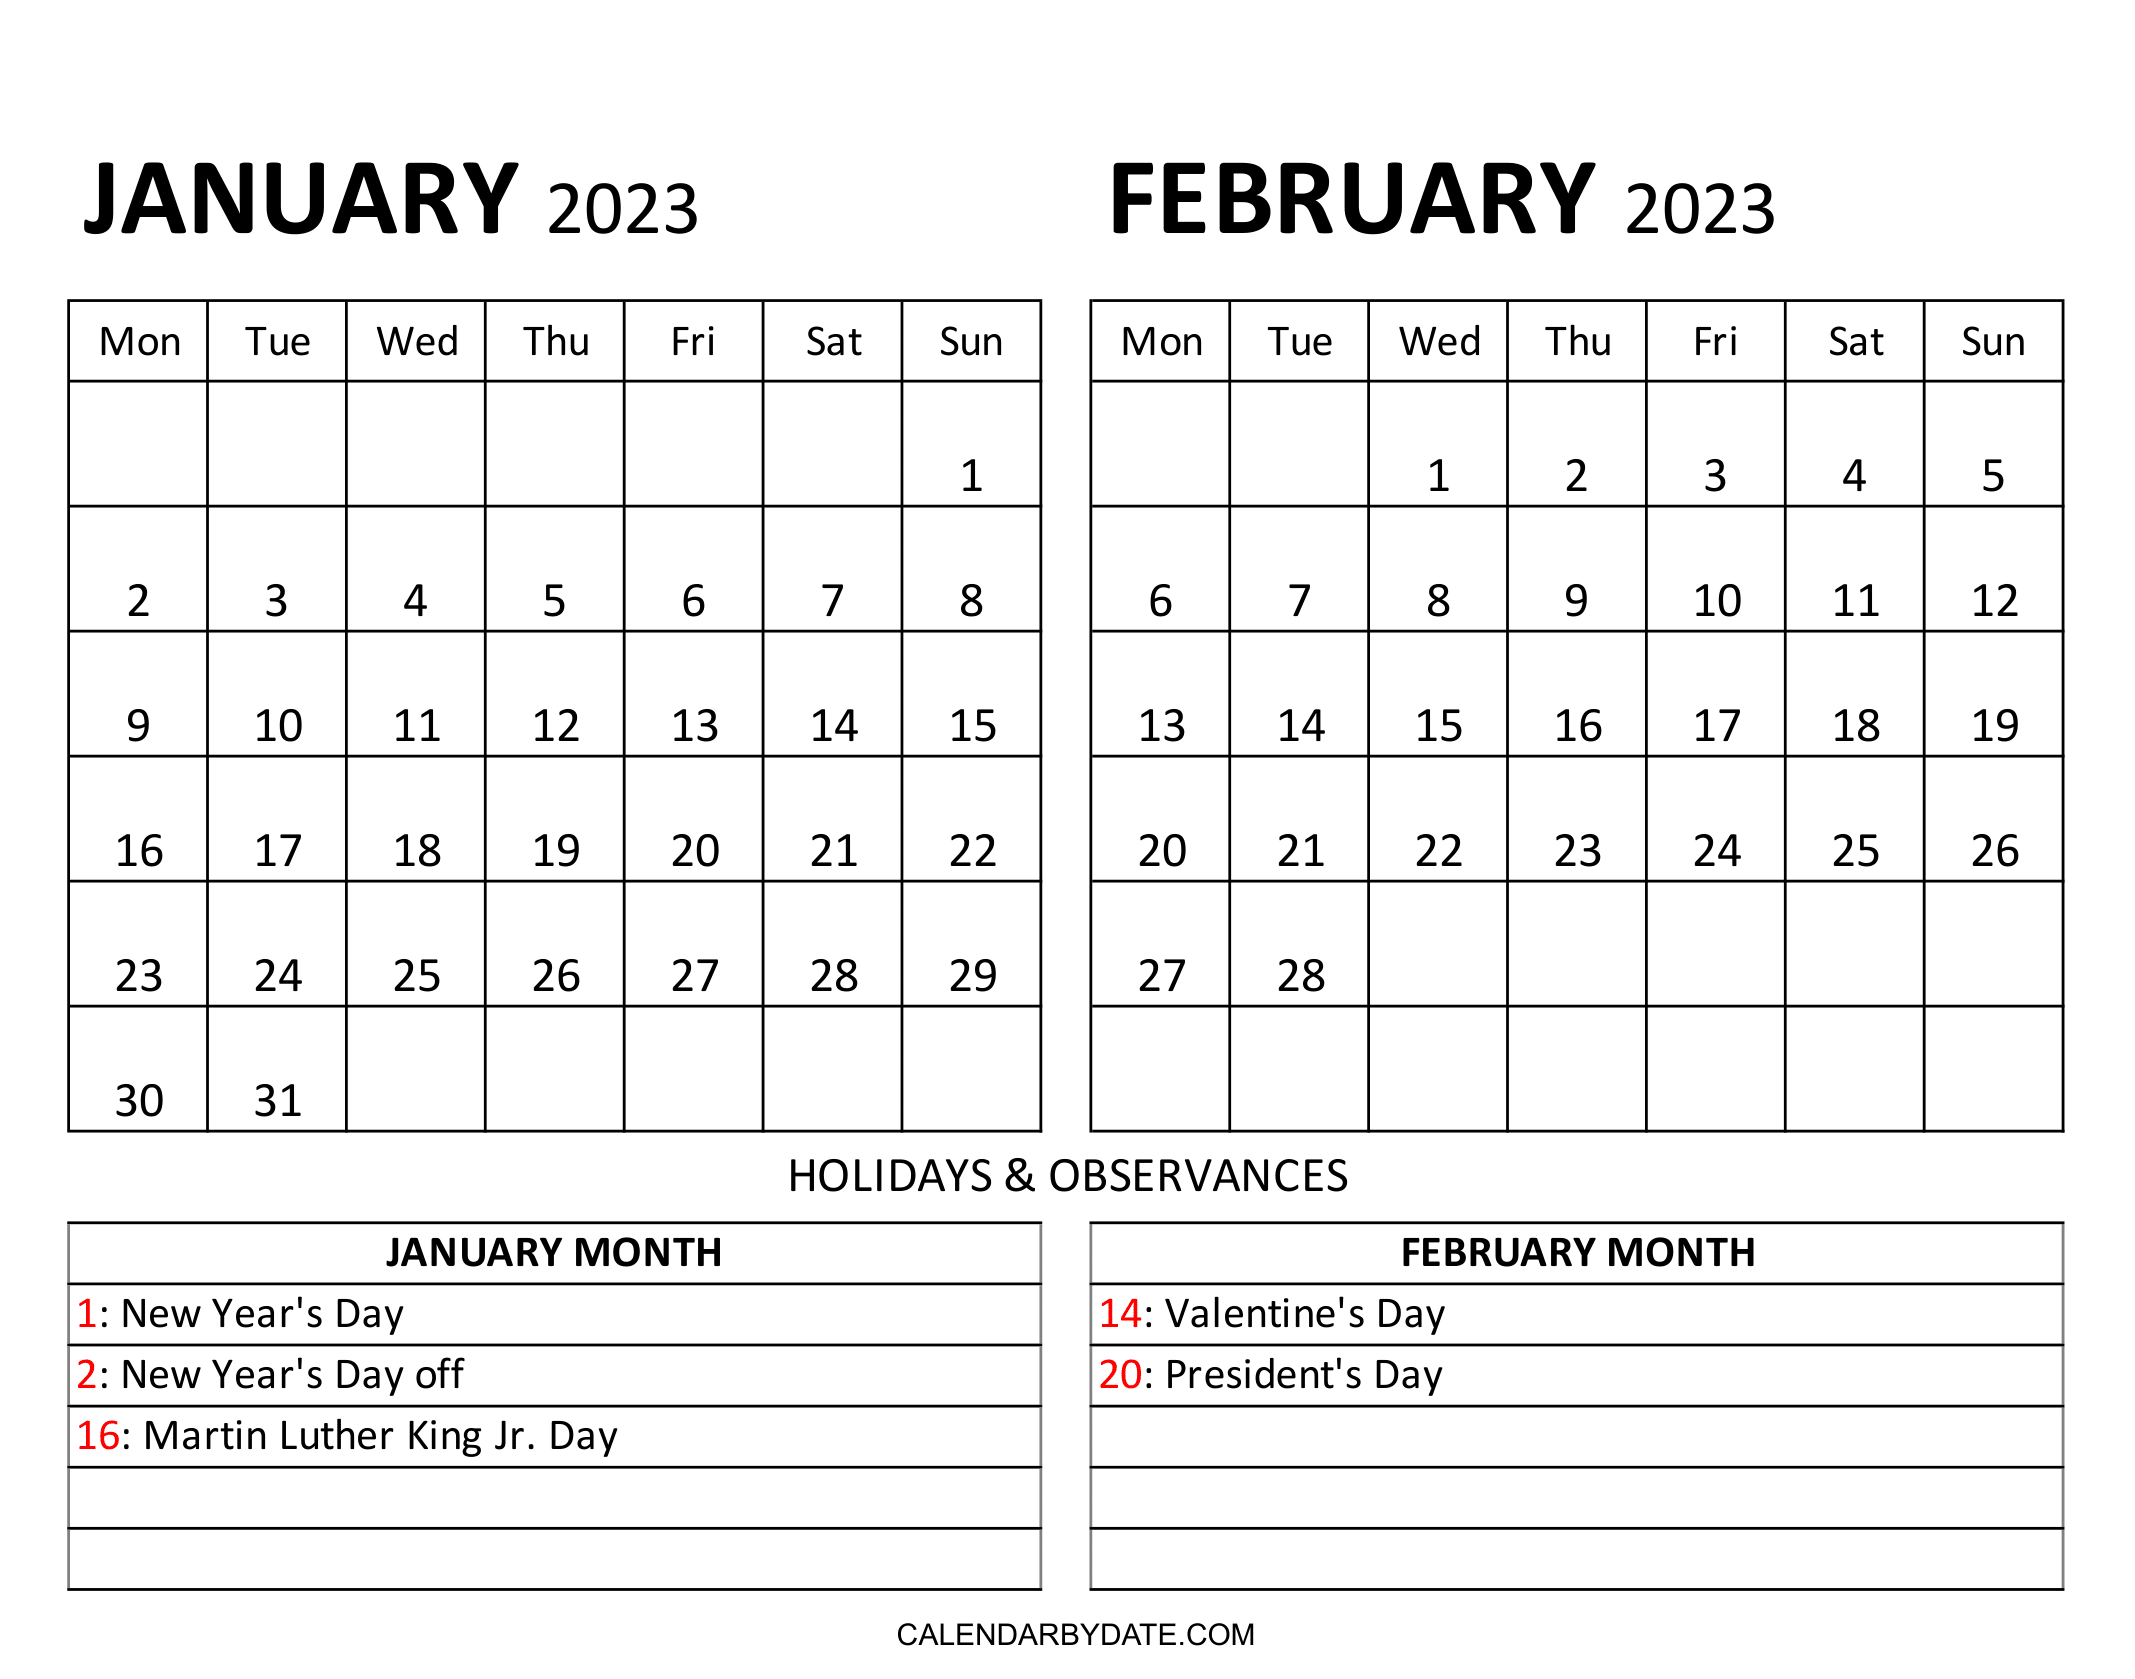 On one page, January-February 2023 calendar provides a list of US Federal holidays, Bank holidays and observances in the United States.